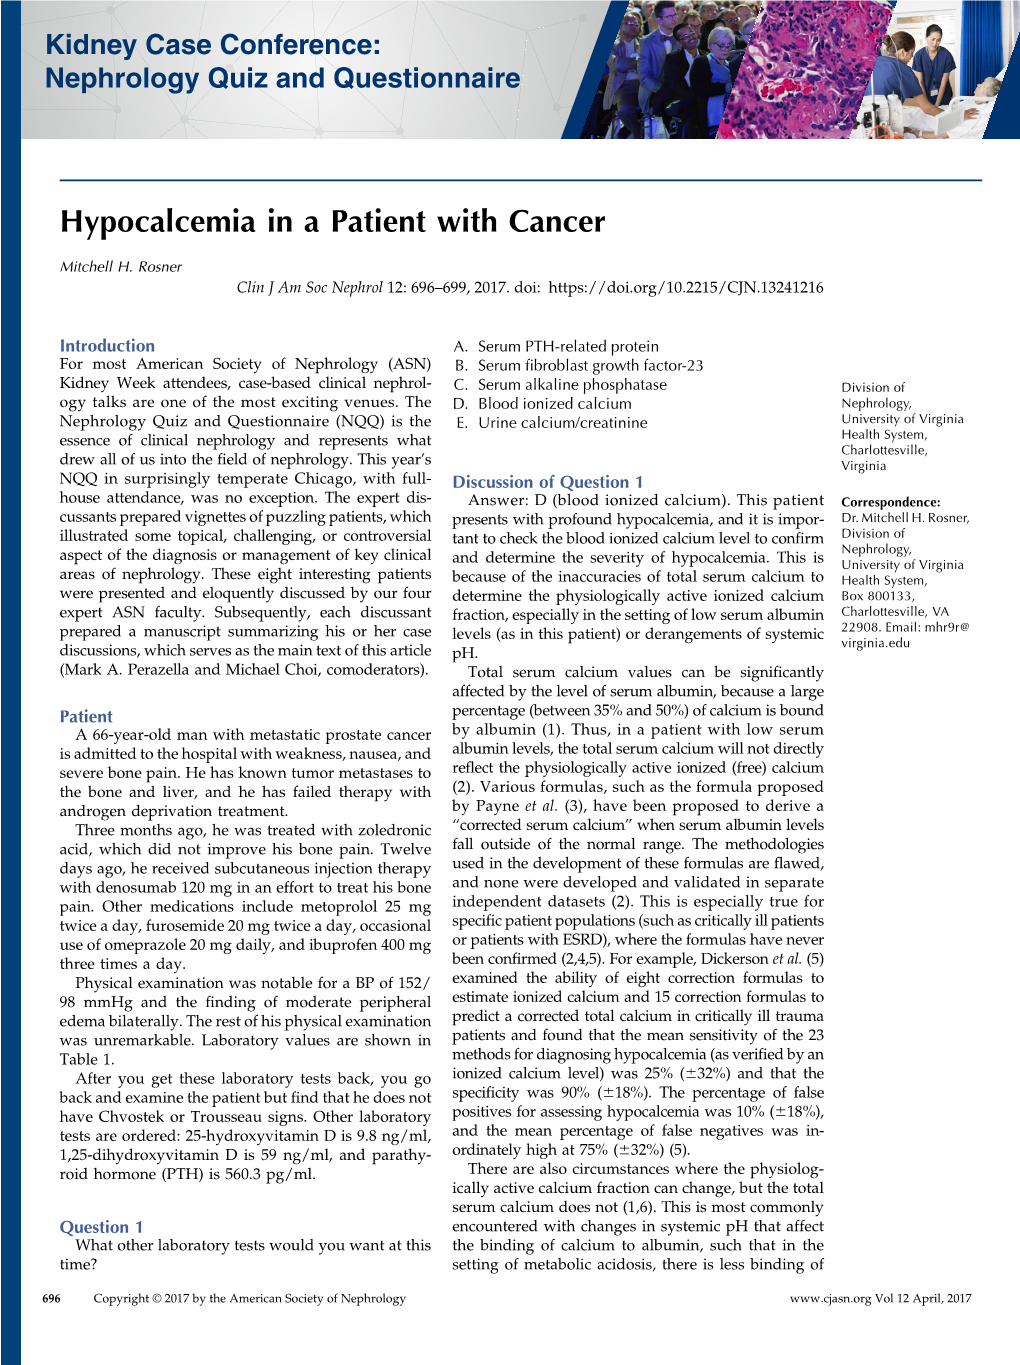 Hypocalcemia in a Patient with Cancer